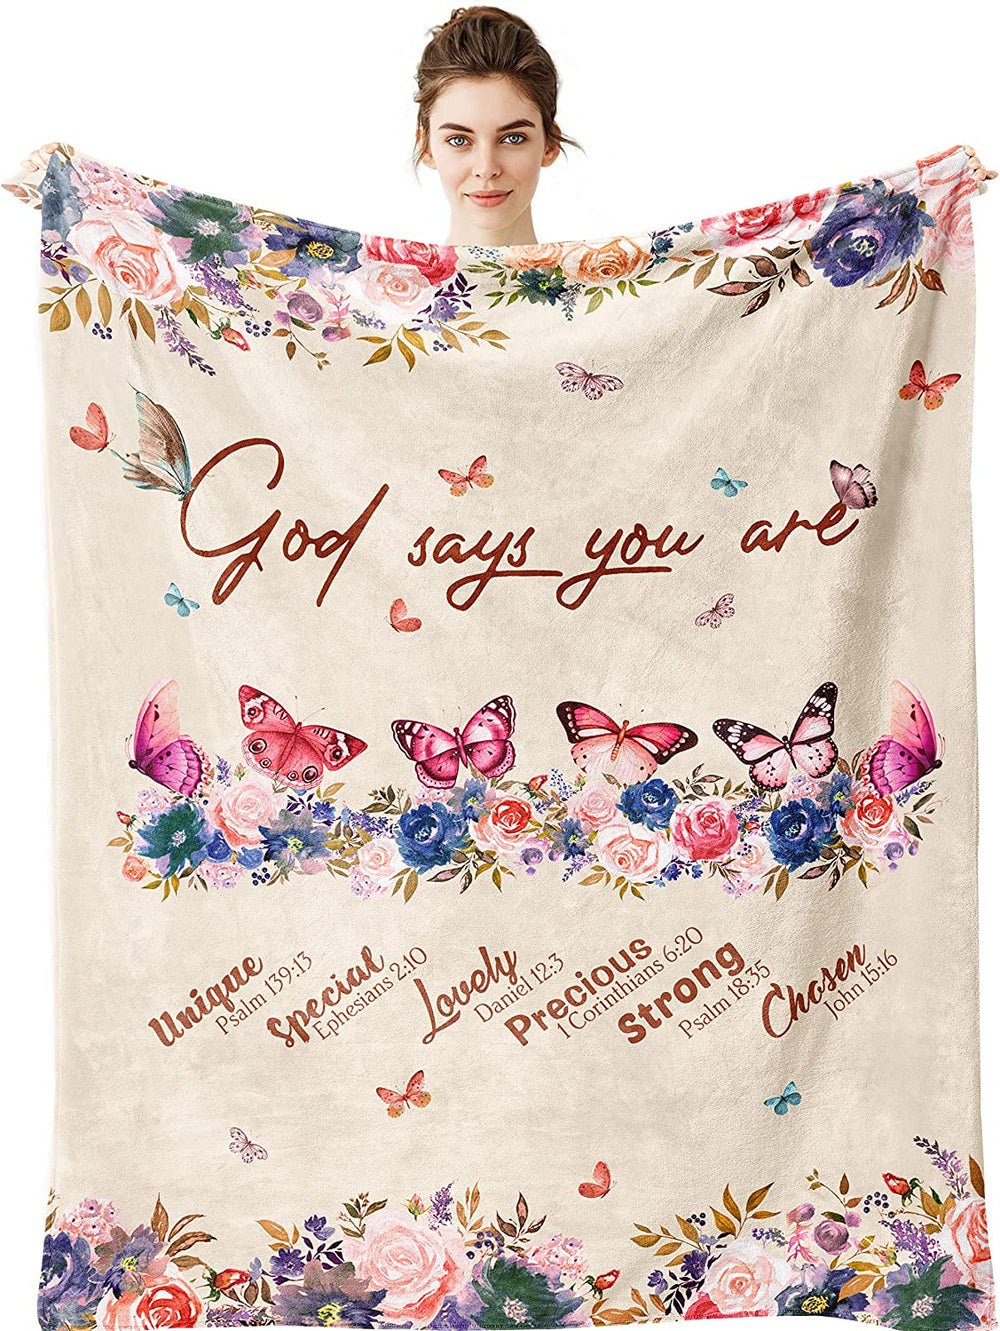 Religious Butterfly Gifts: You Are an Inspiration Blanket for Christian Women and Men – JEB024